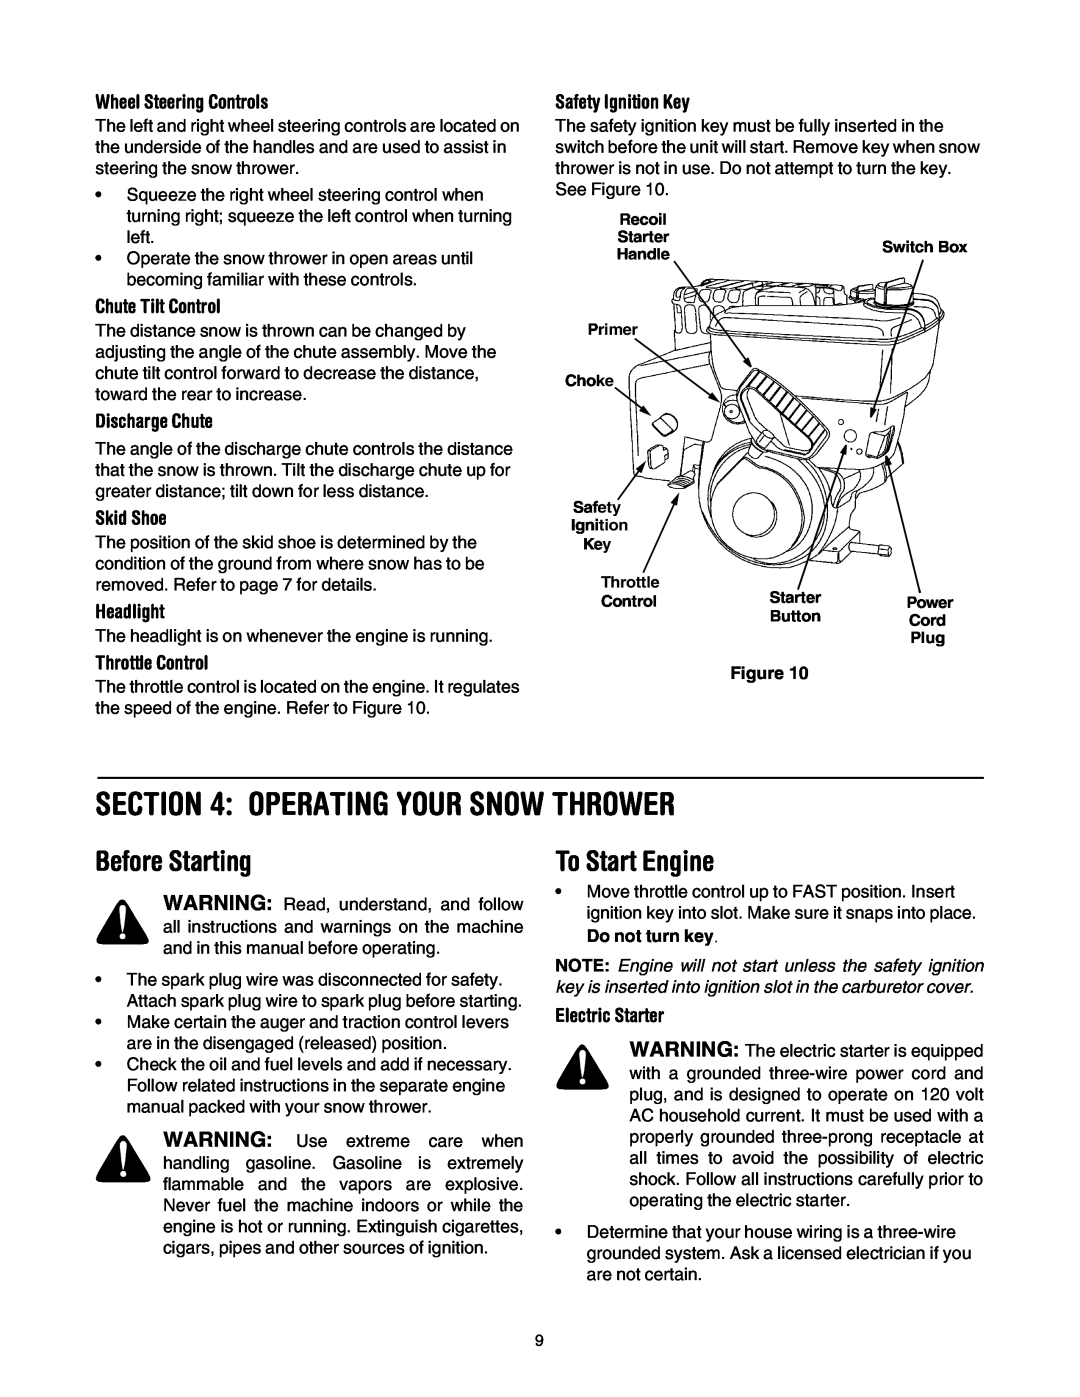 Cub Cadet 1345 SWE Operating Your Snow Thrower, Before Starting, To Start Engine, Wheel Steering Controls, Discharge Chute 